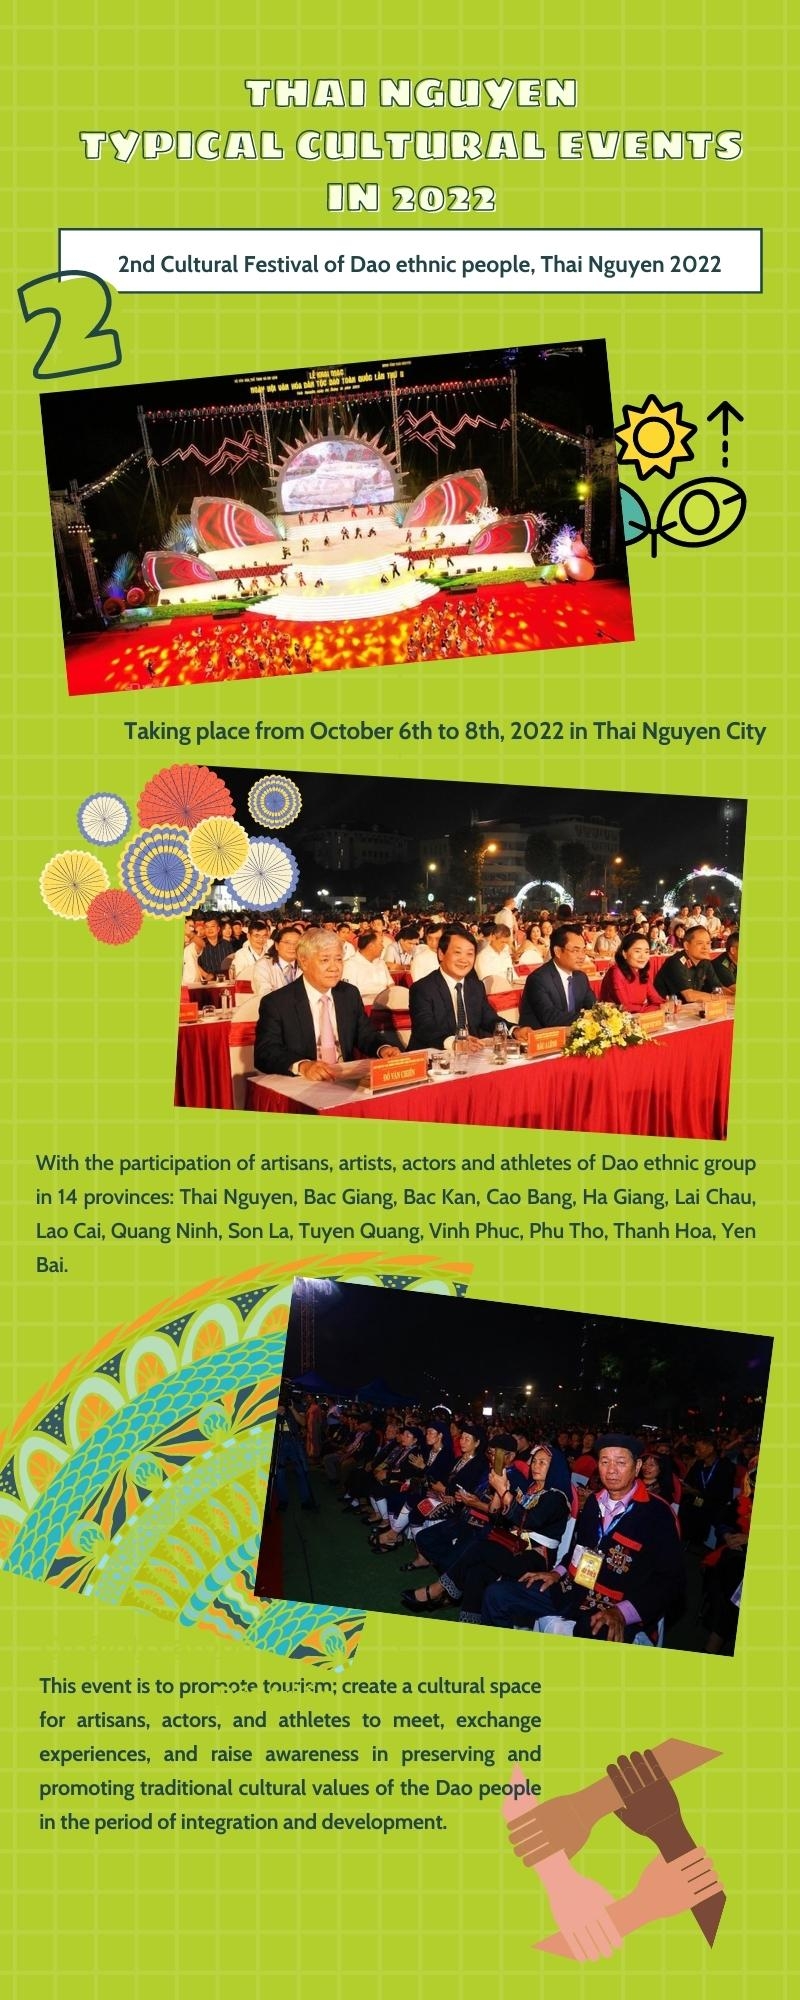 THAI NGUYEN: TYPICAL CULTURAL EVENTS IN 2022